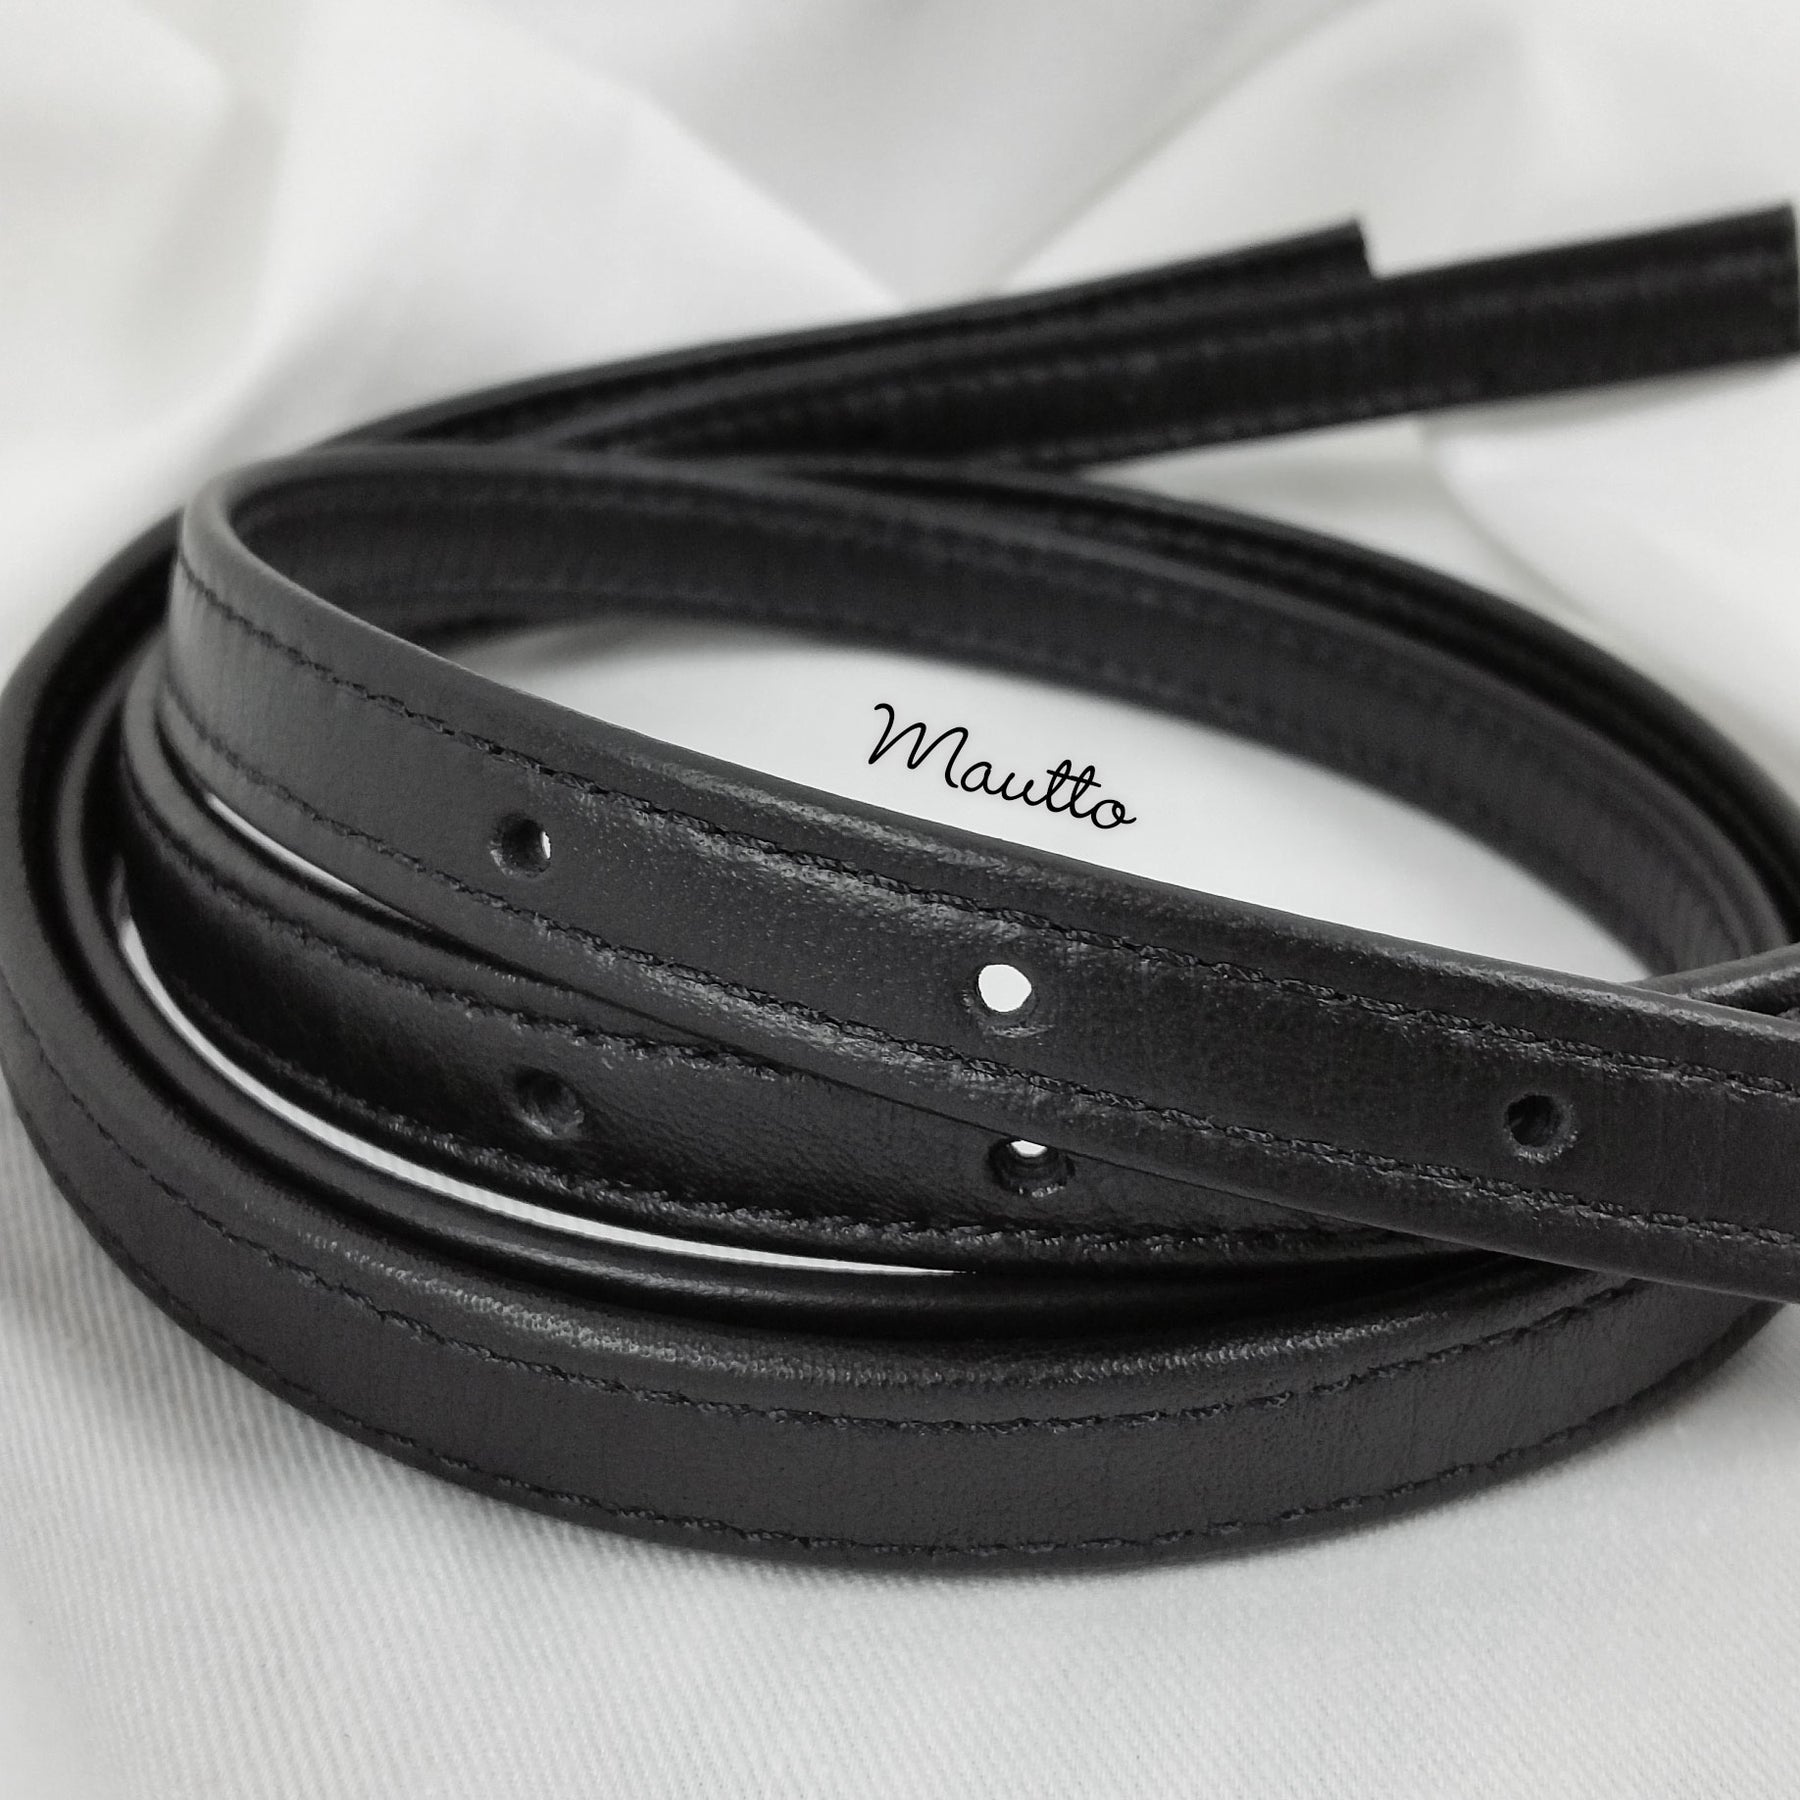 Mautto Replacement Leather Straps for Mk Jet Set or Similar - 1/2 inch Wide Black Pebble Leather